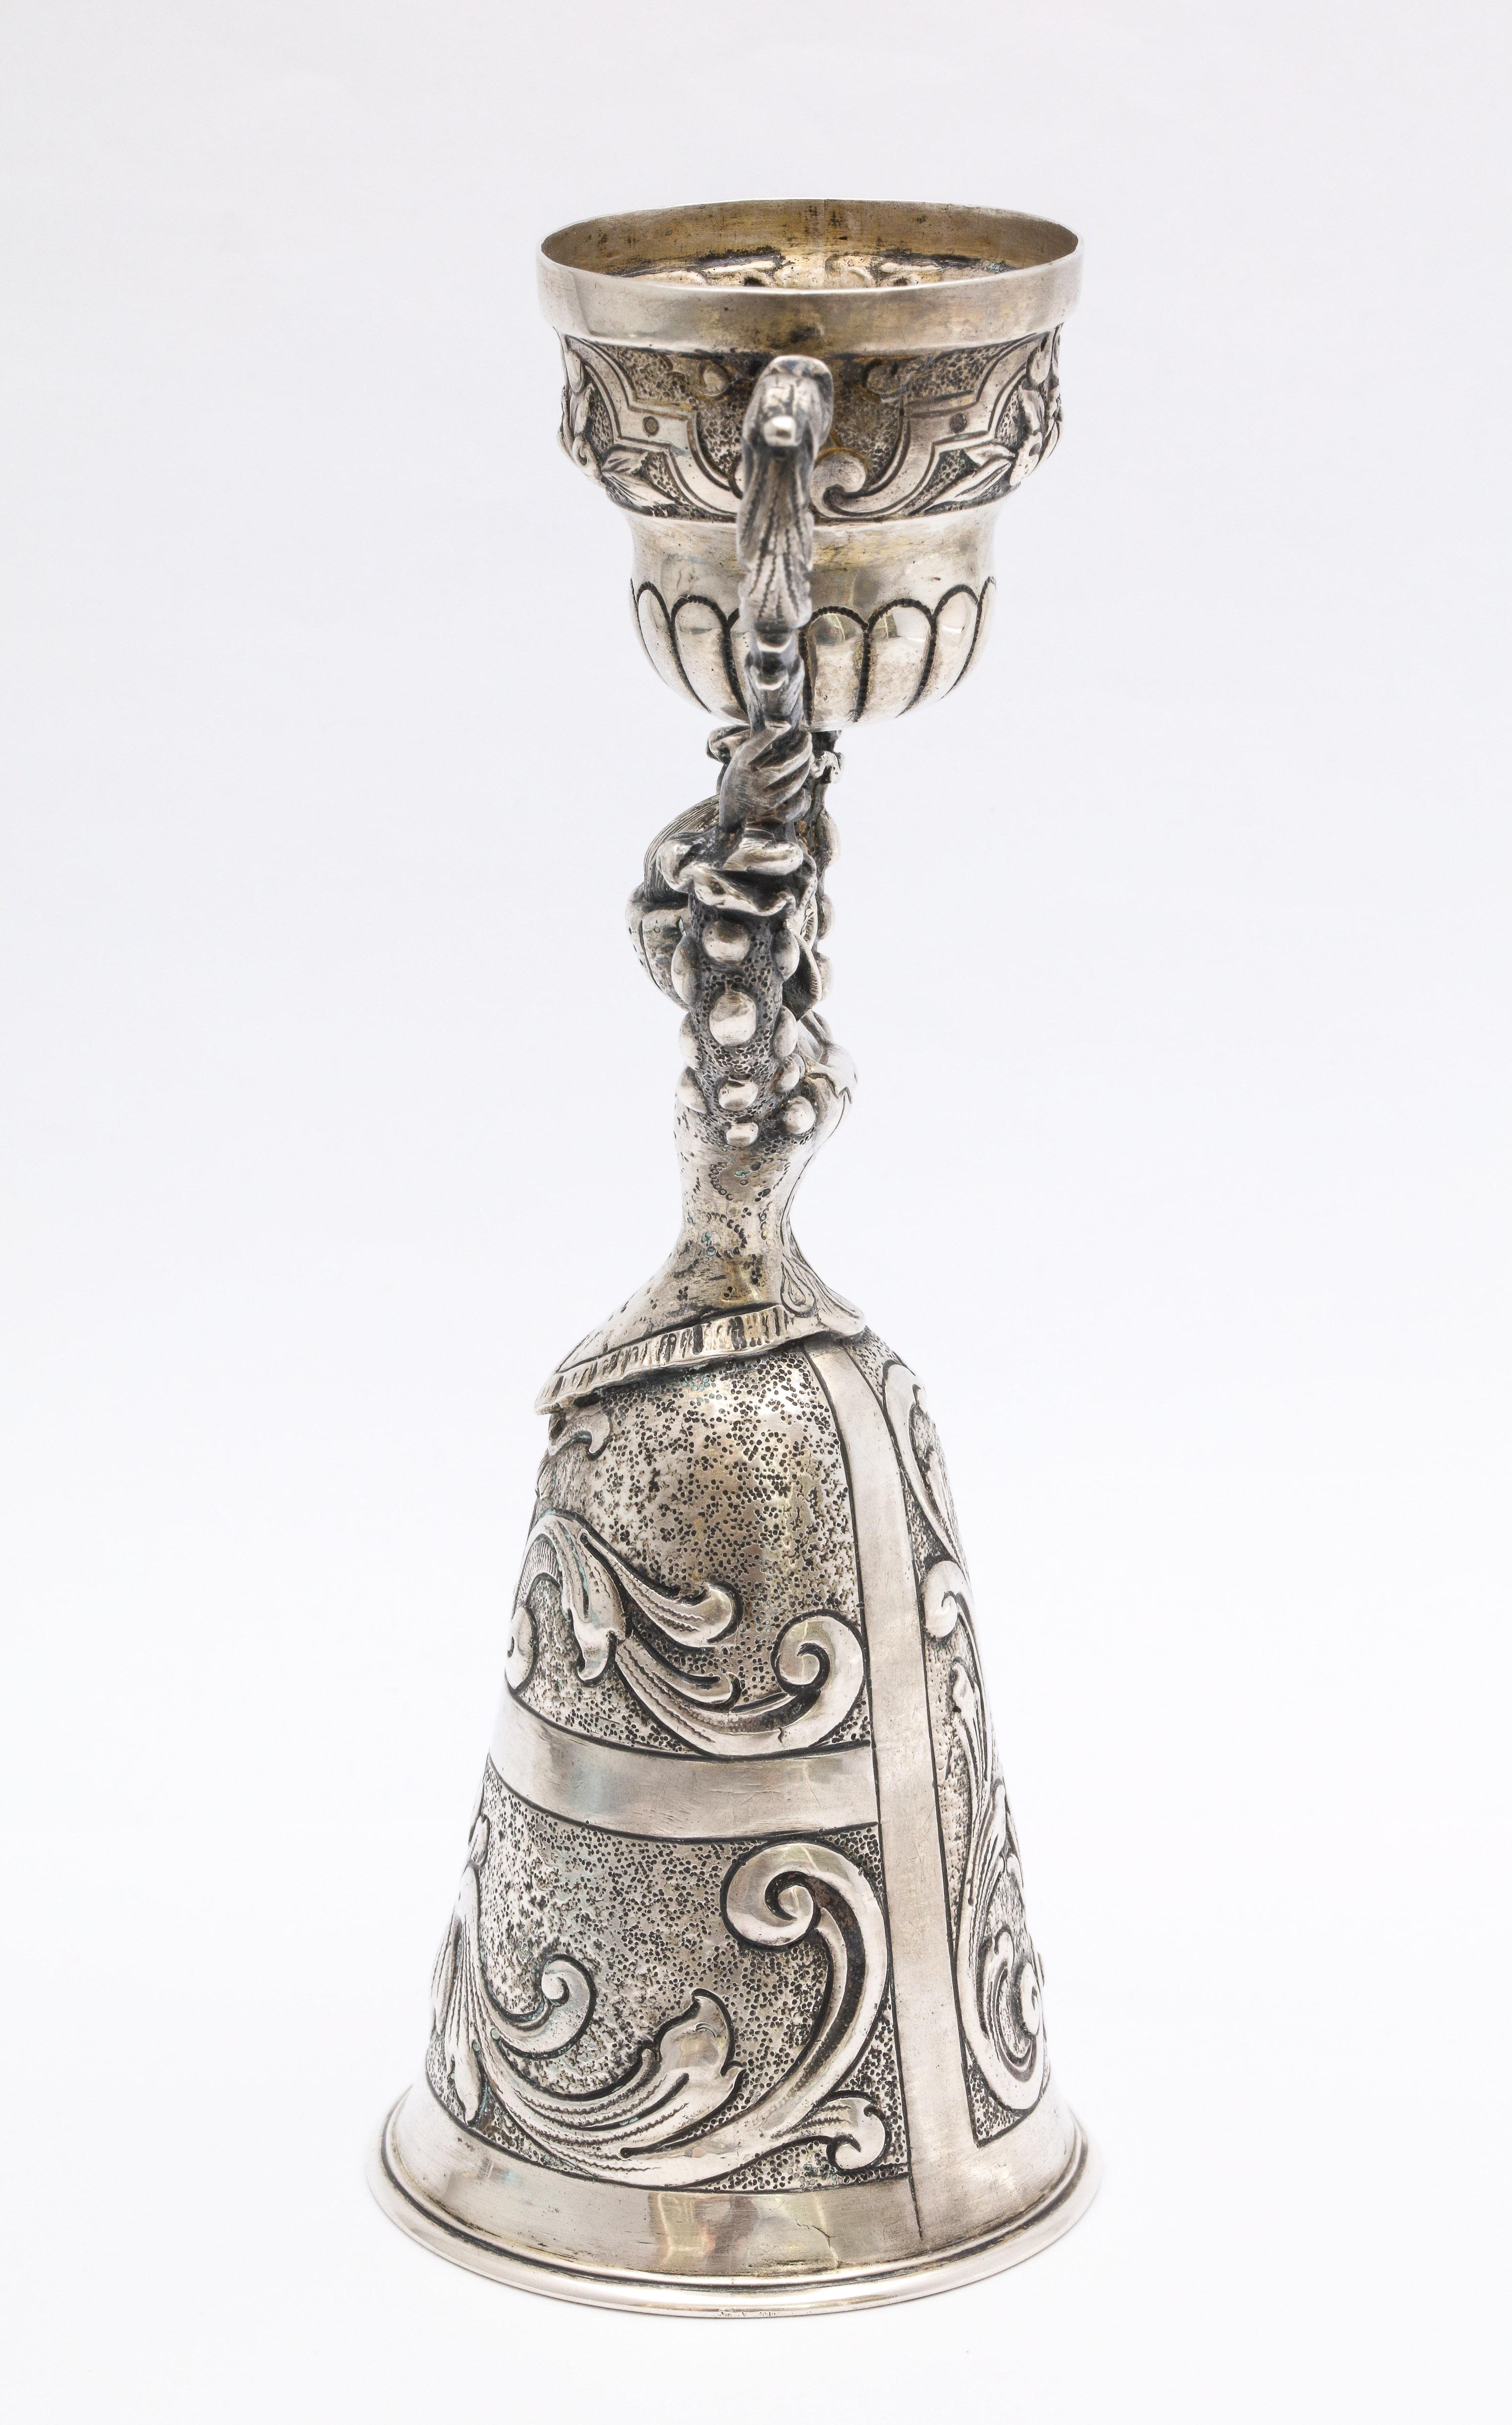 Dutch Victorian Period Continental Silver '.800' Wager/Marriage Cup 1